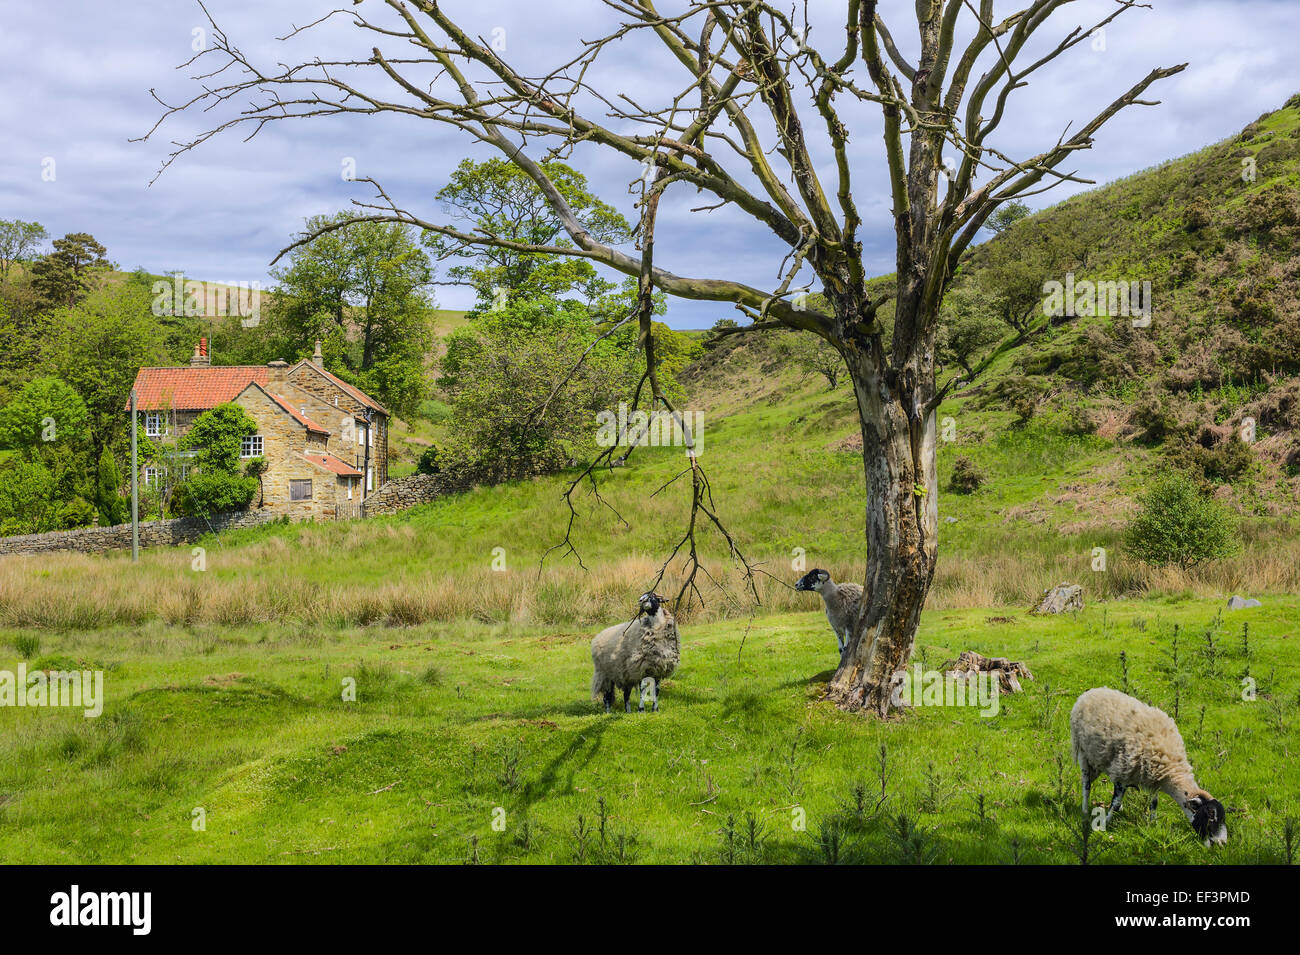 The North York Moors National Park with a stone cottage, trees,. and sheep grazing on a fine summer morning. Stock Photo